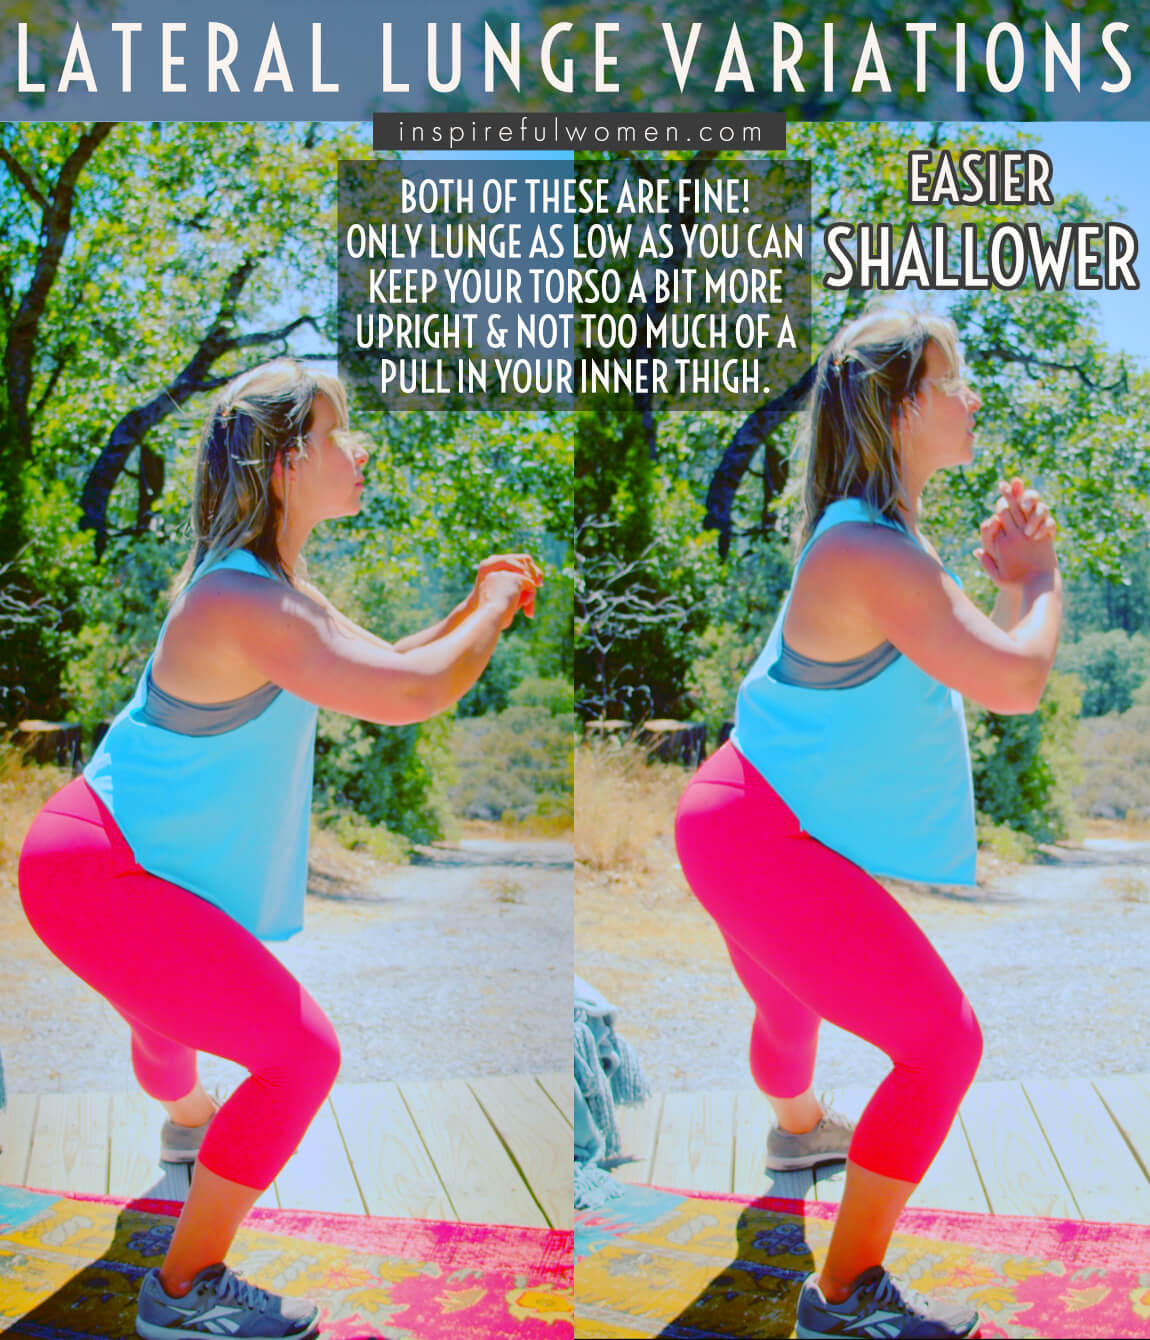 shallower-lateral-lunge-variation-easier